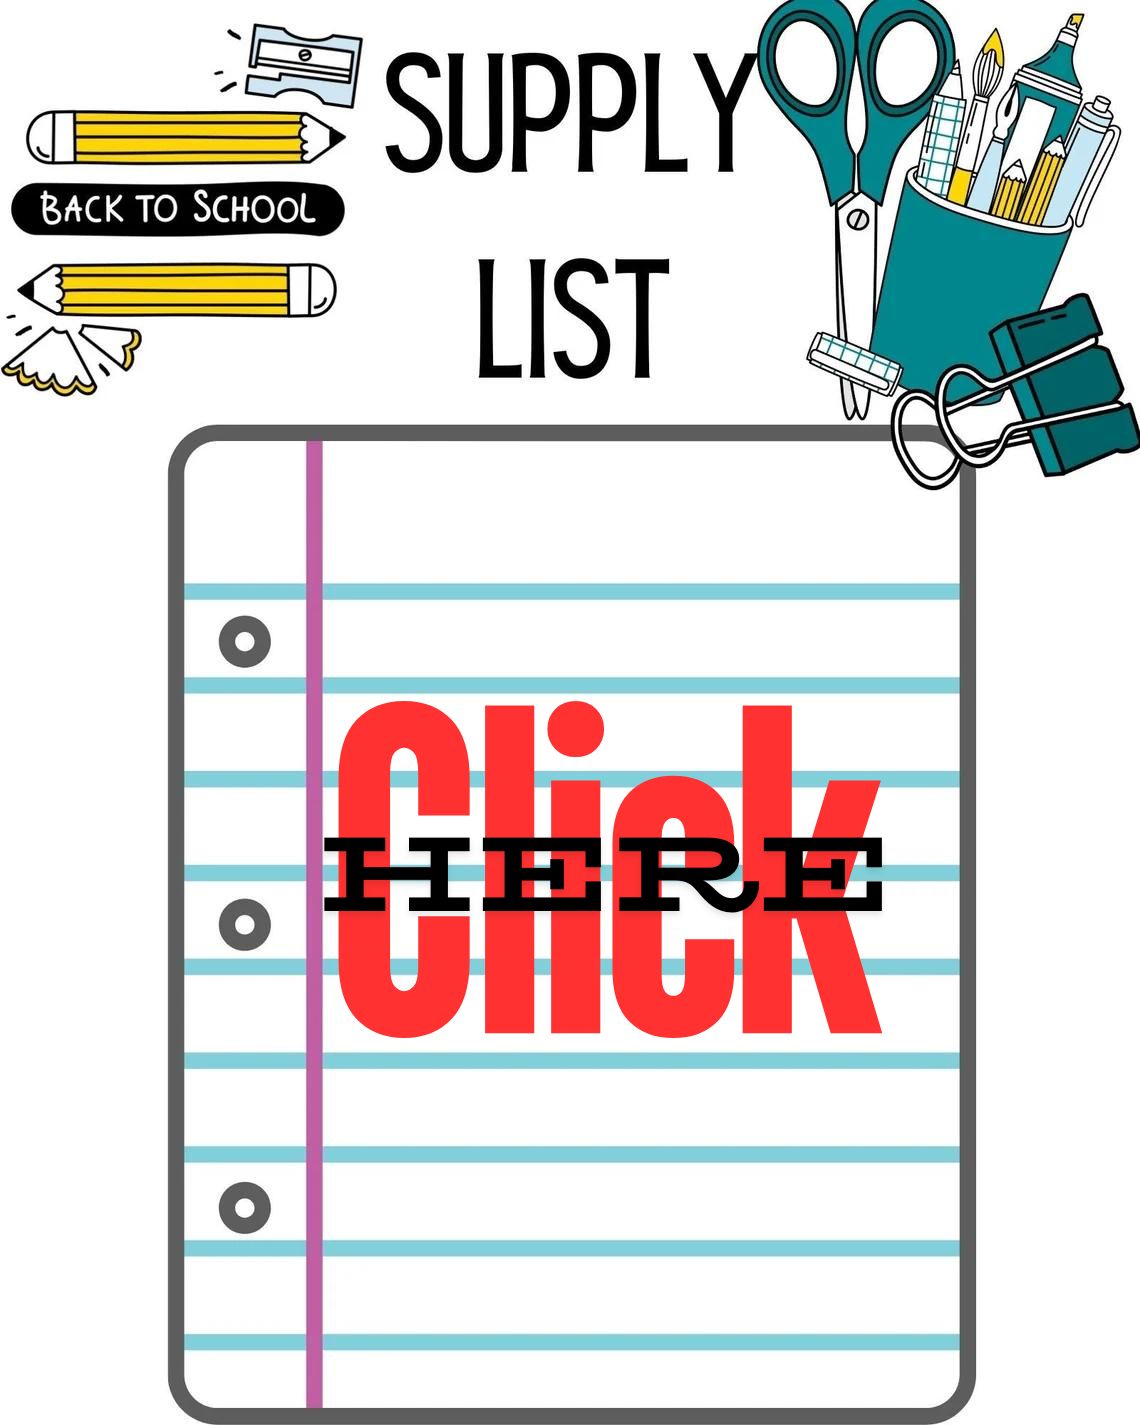 Click Here for School Supplies List